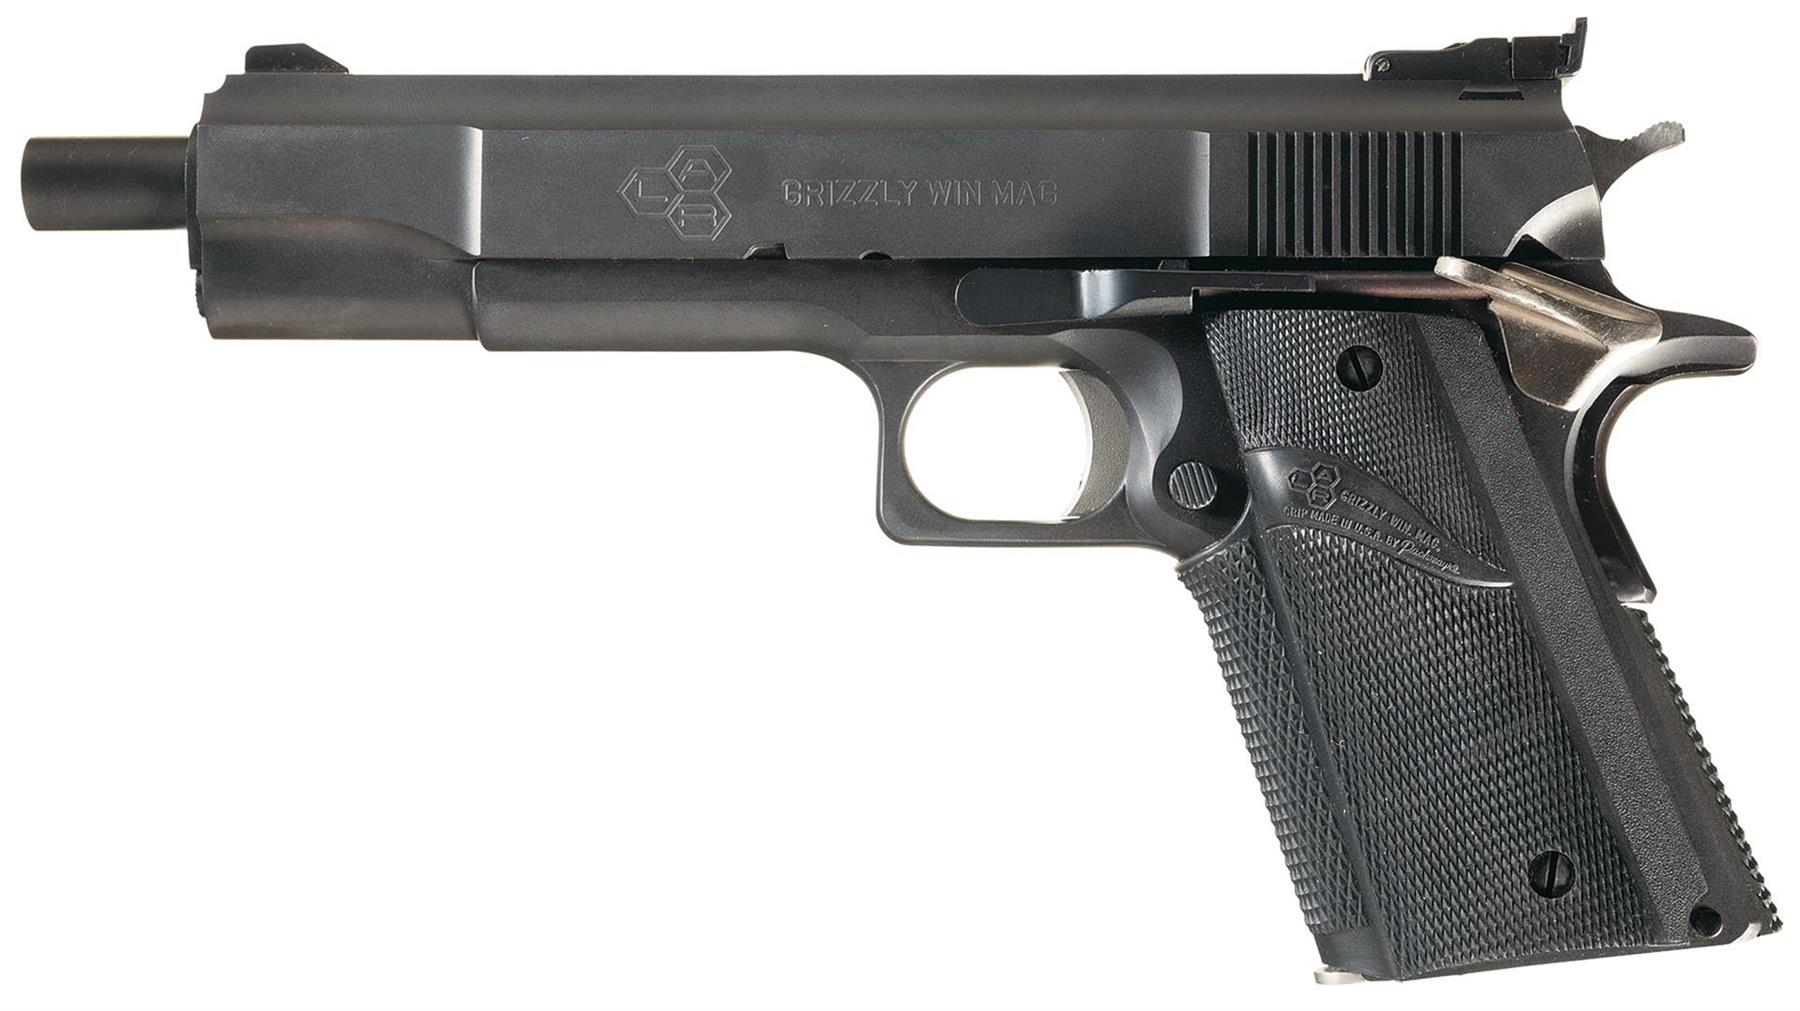 LAR Grizzly 45 Win Mag Mark I Semi-Automatic Pistol with Holster.